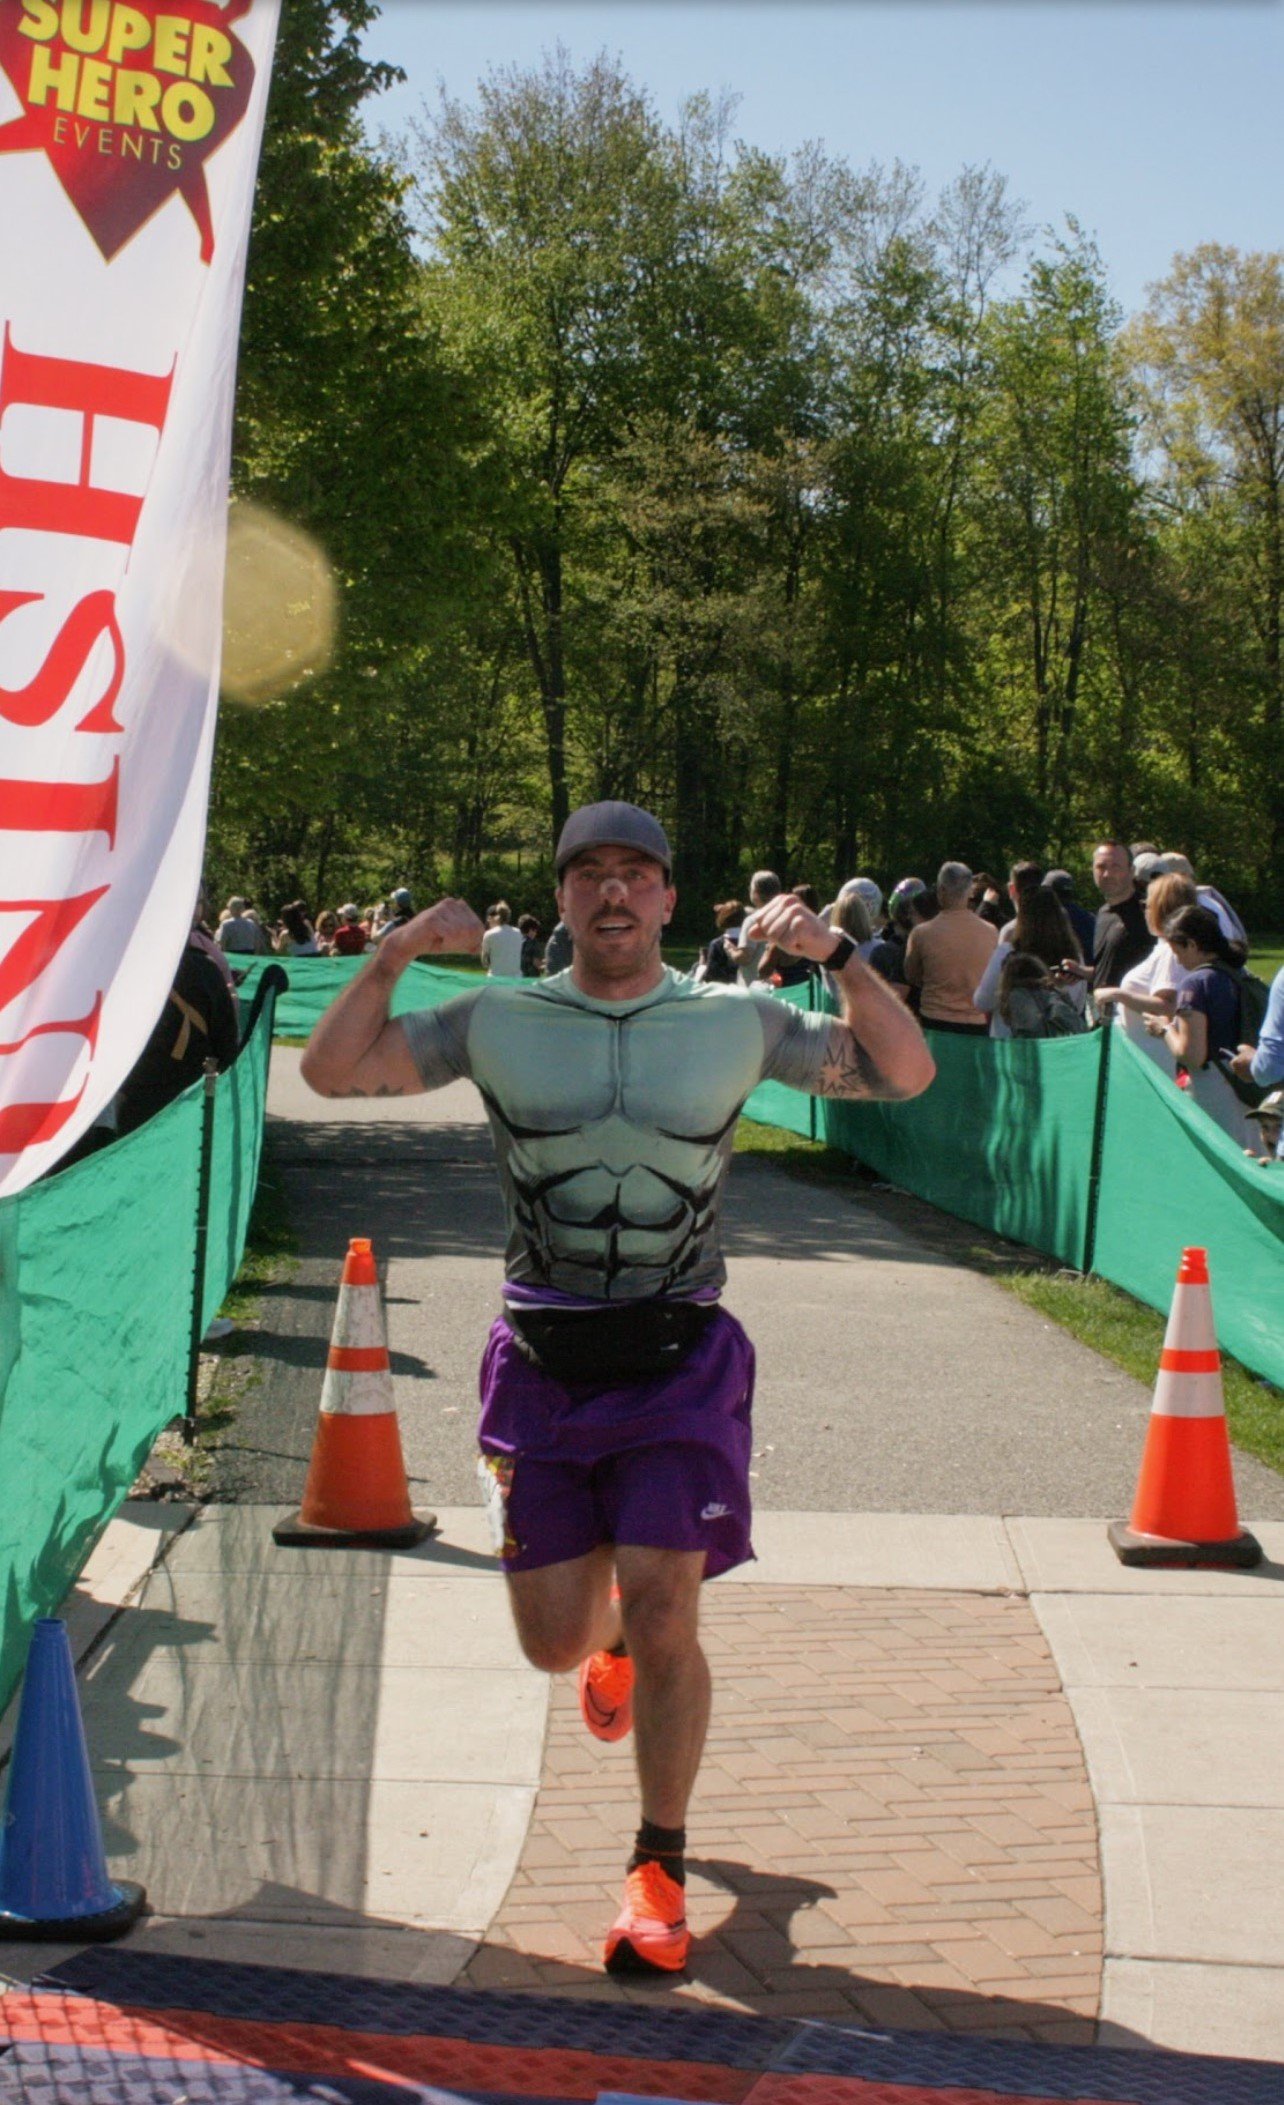 Marc Guido running across the finish line in a Hulk t-shirt